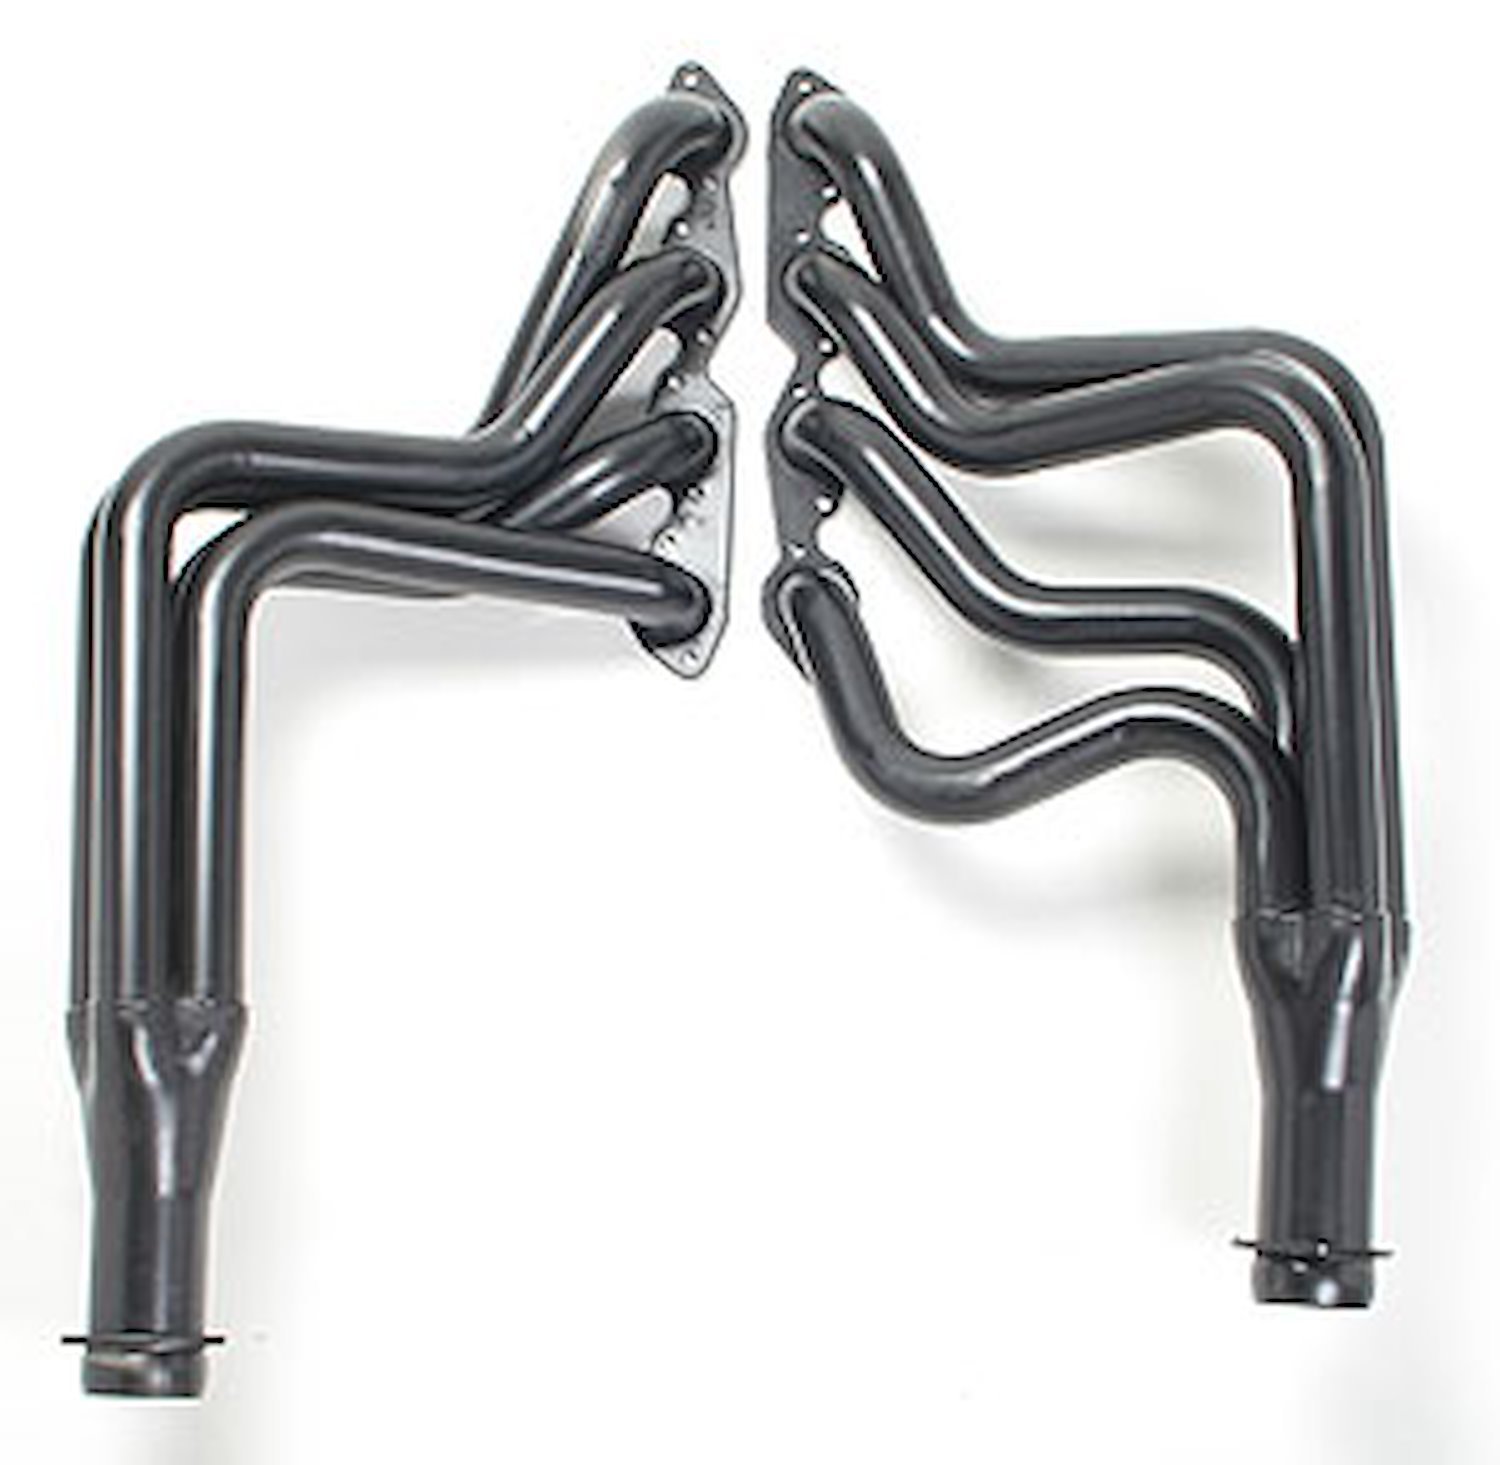 Standard Duty Uncoated Headers for 1975-79 Chevy II,